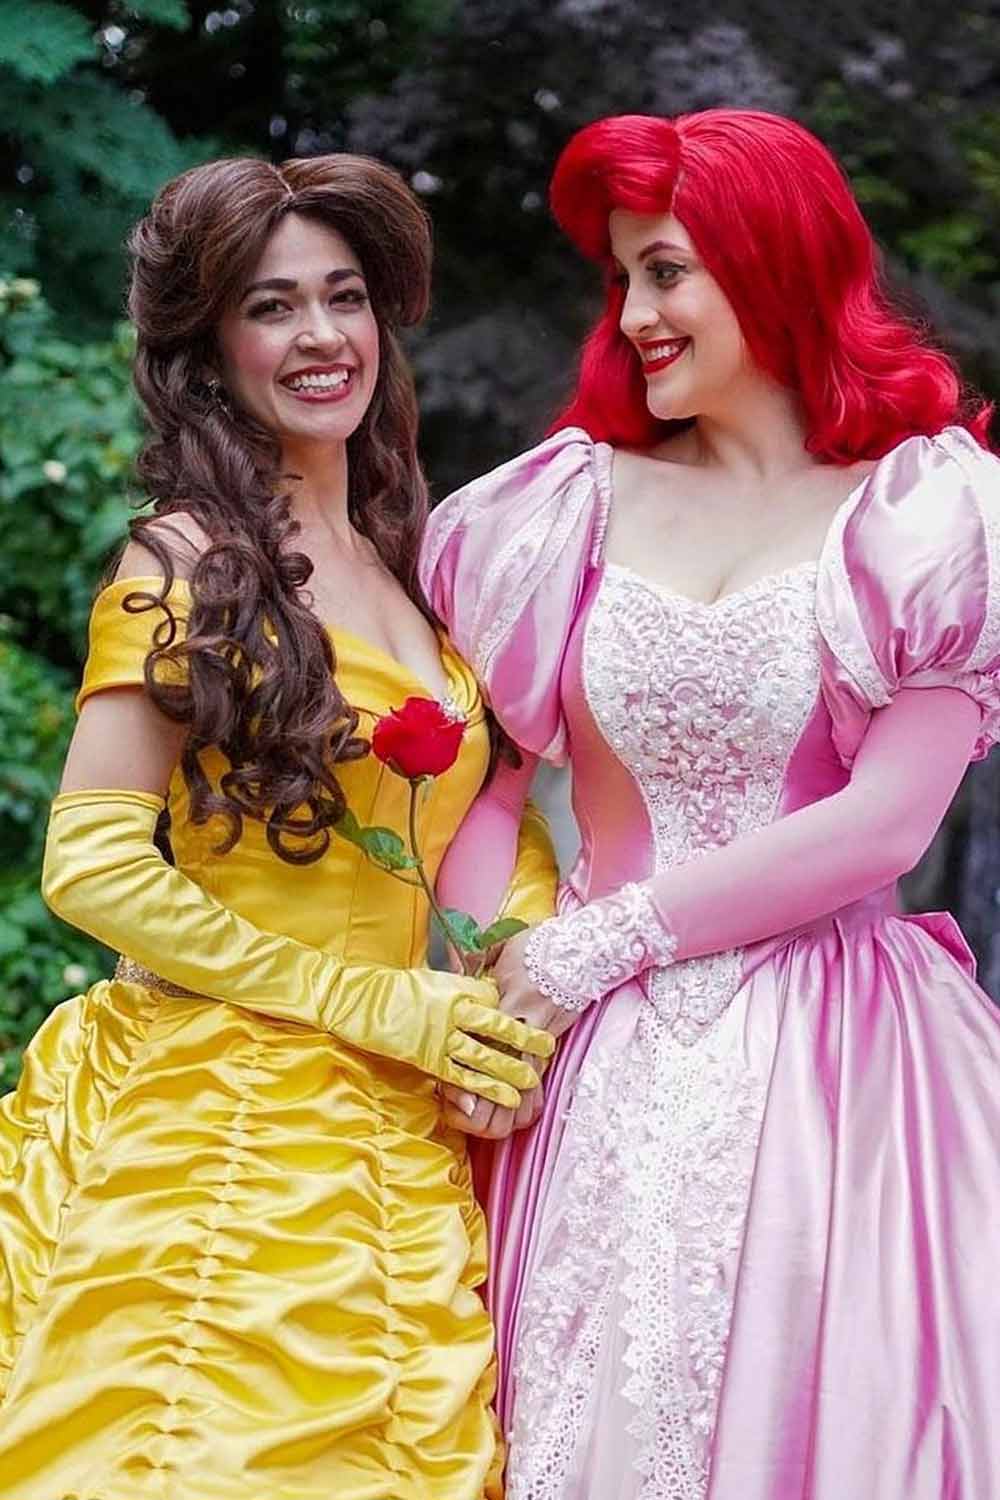 Belle and Ariel Halloween Costumes for Best Friends